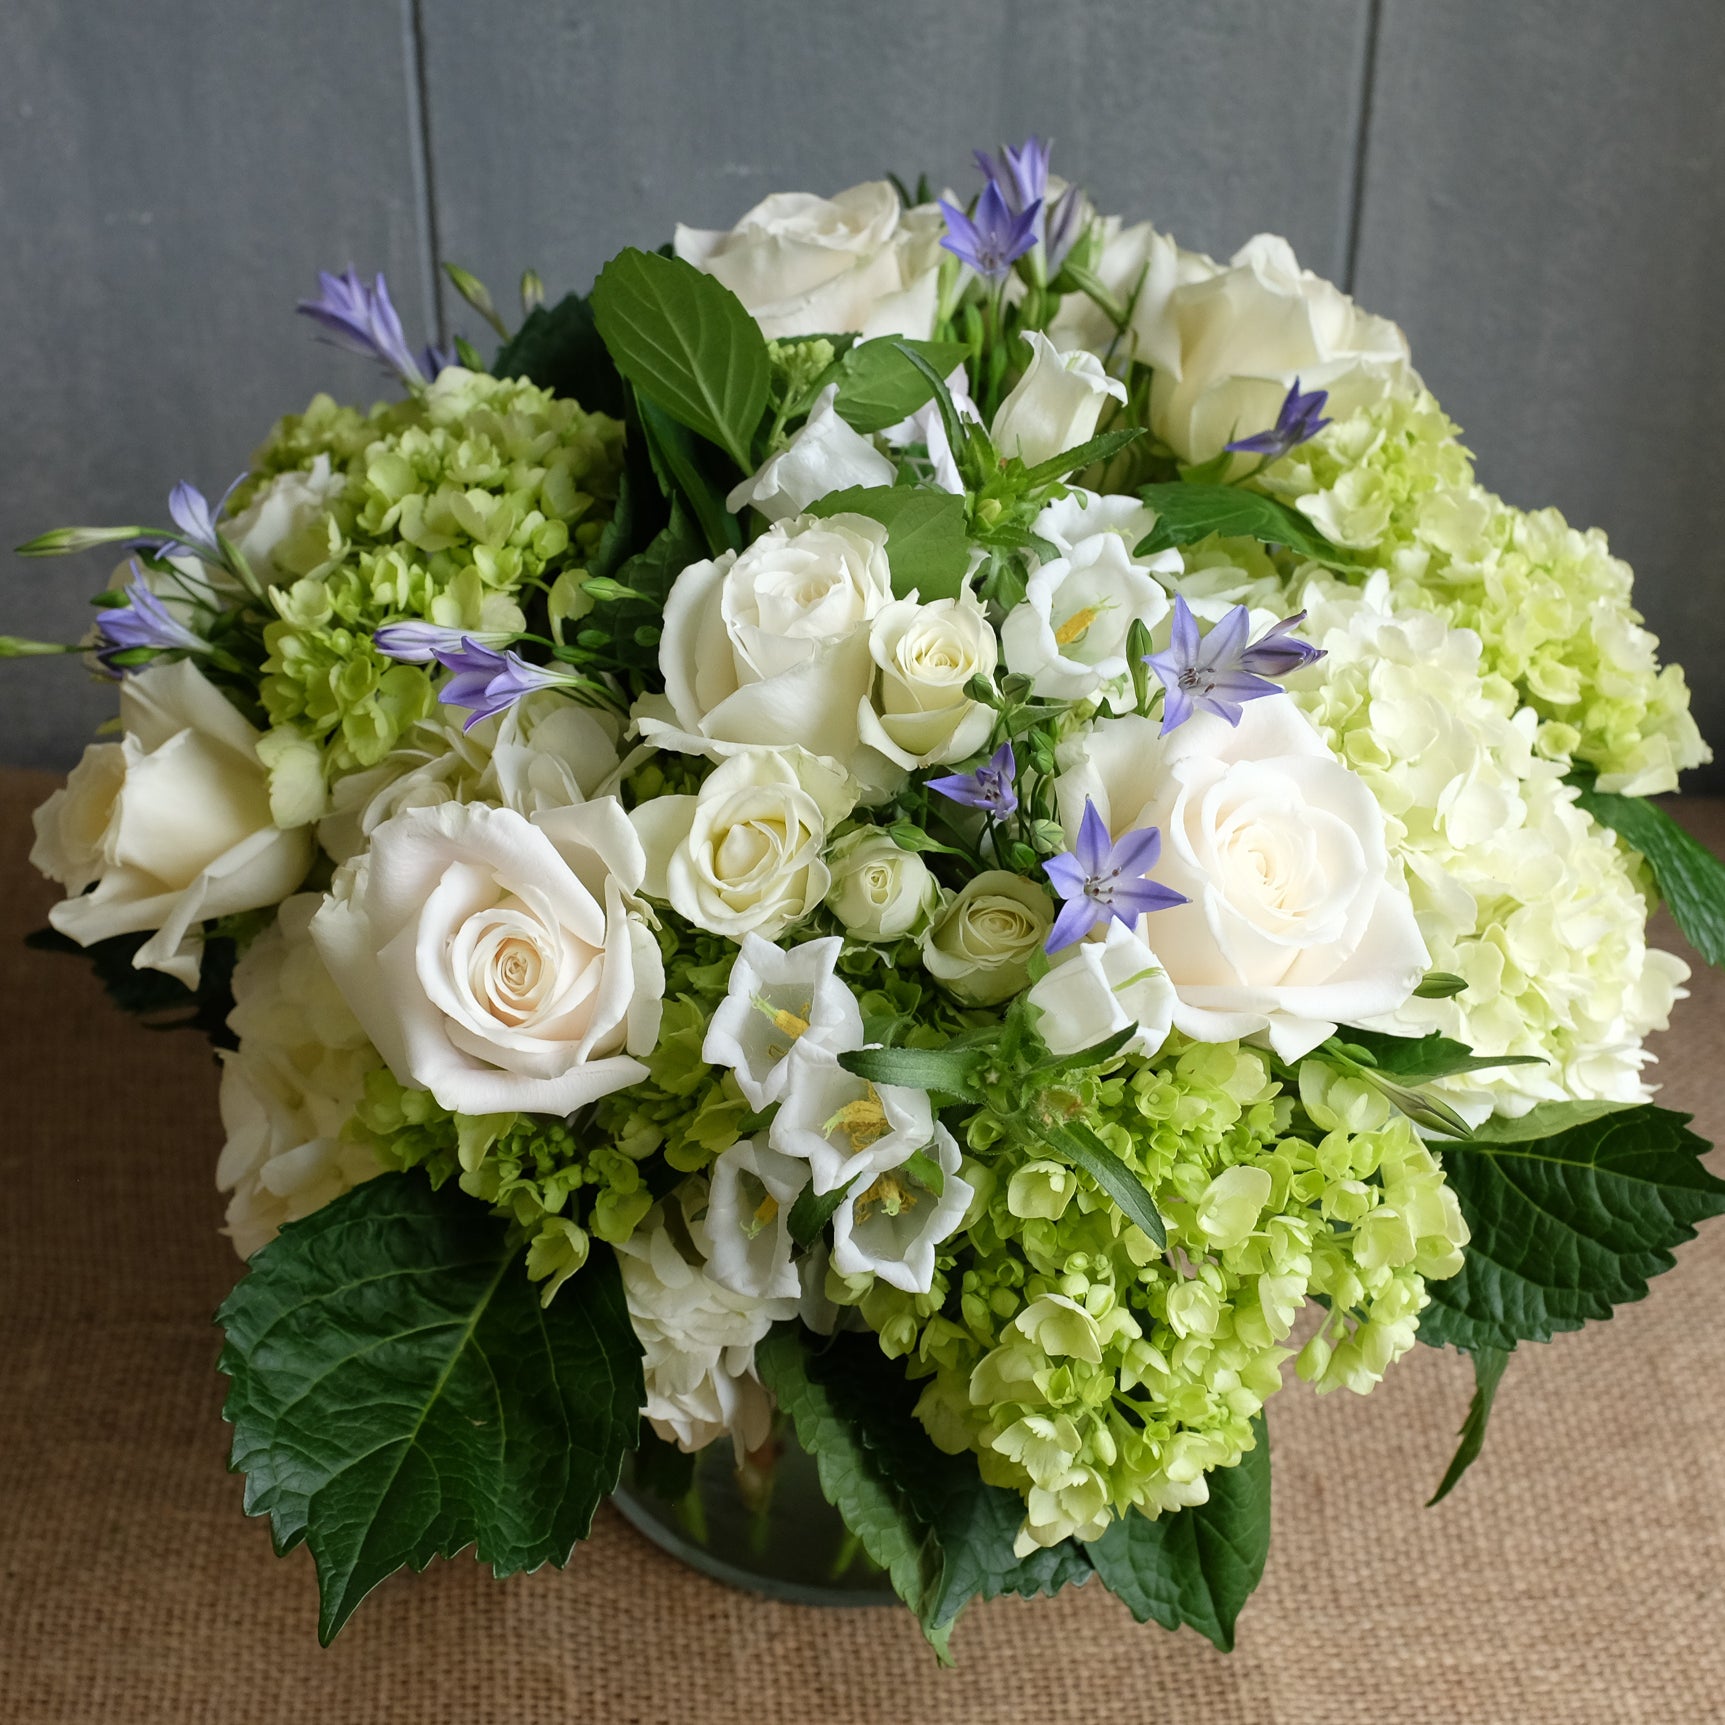 Lush floral bouquet of white and green flowers with a touch of blue